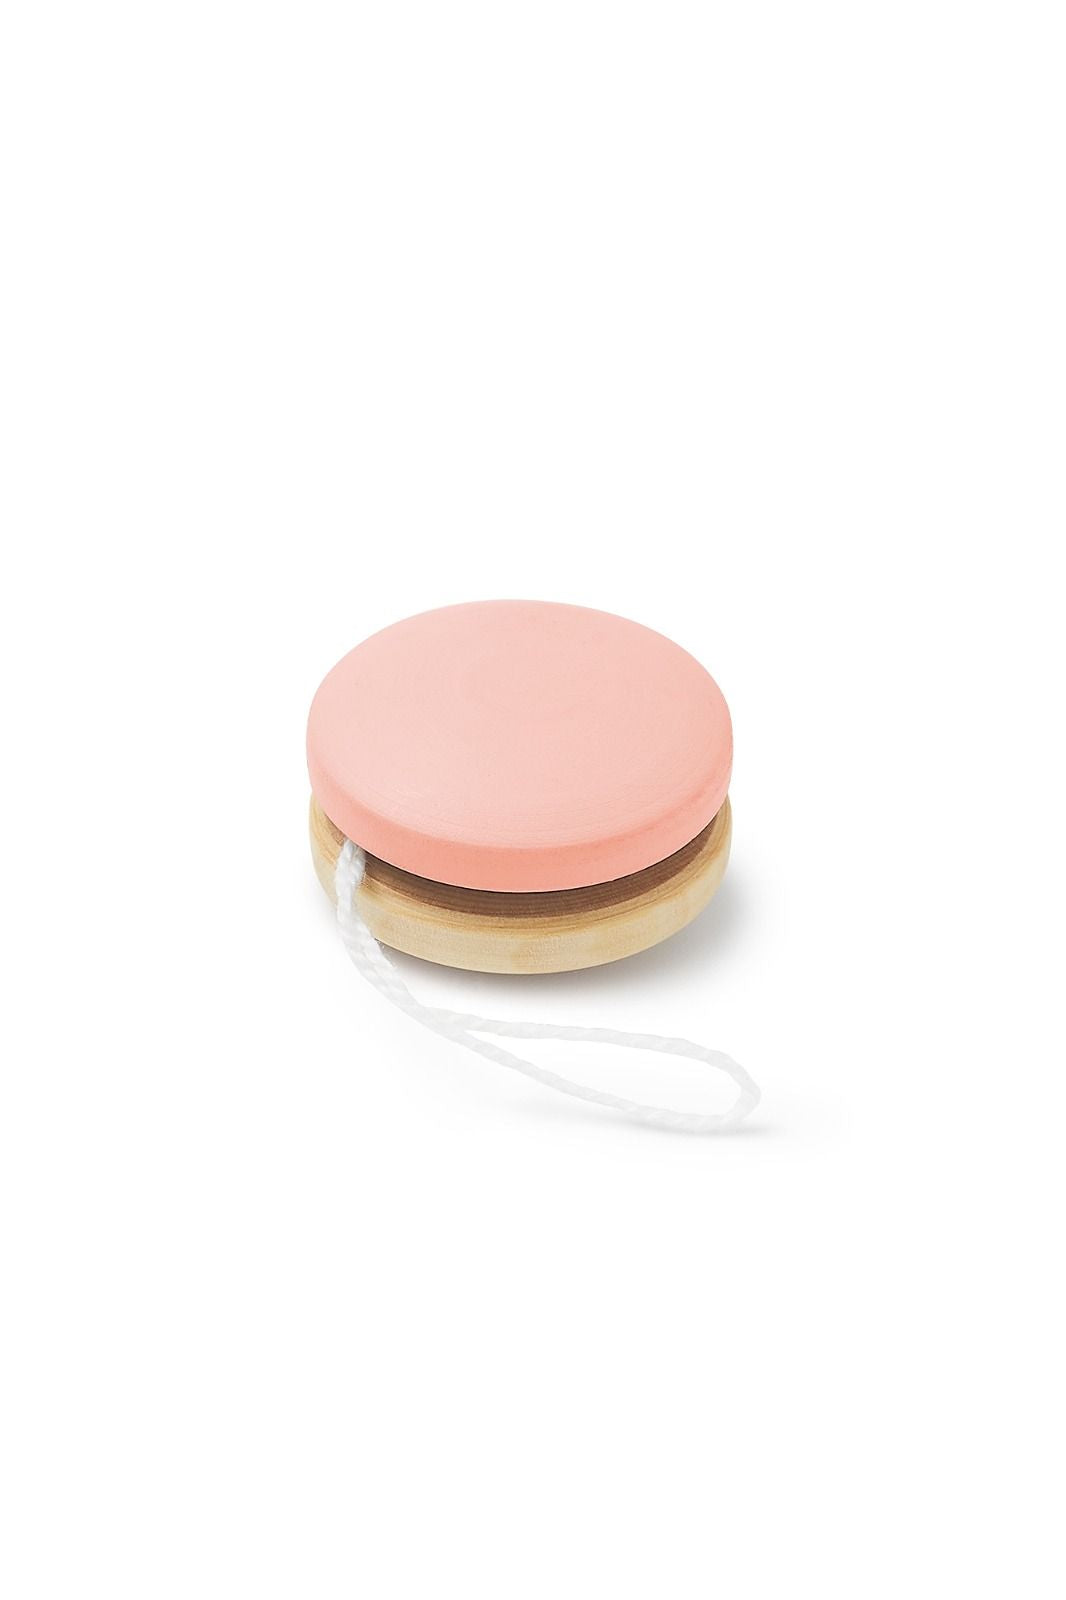 Mini Wooden YoYo- Eco-friendly and entertaining toy for sustainable and nostalgic play.